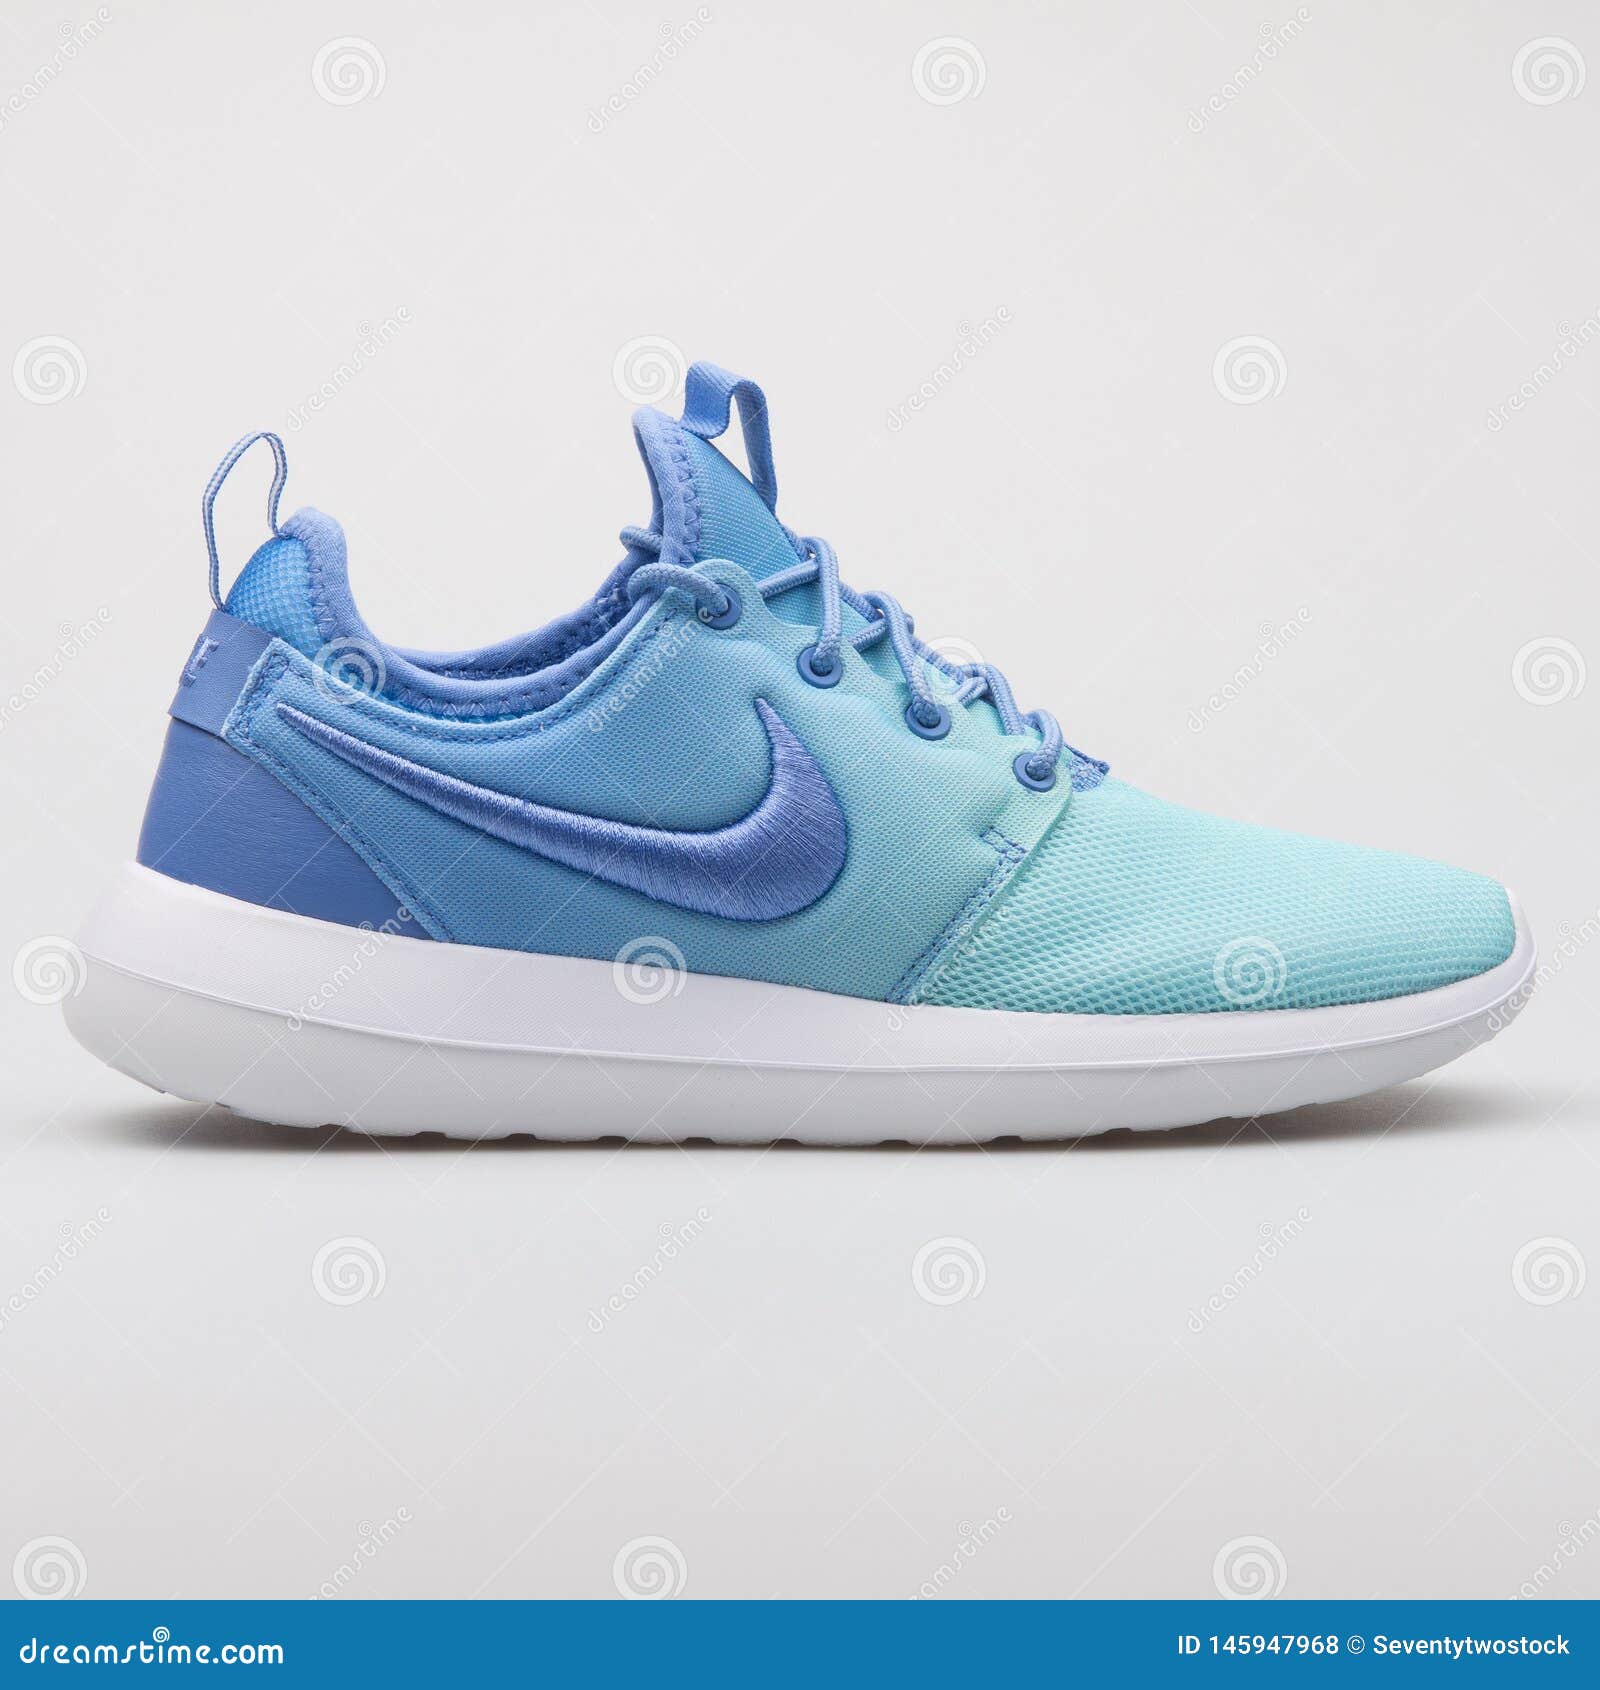 Auto Case Bitterness Nike Roshe Two BR Blue Sneaker Editorial Stock Photo - Image of sneakers,  side: 145947968